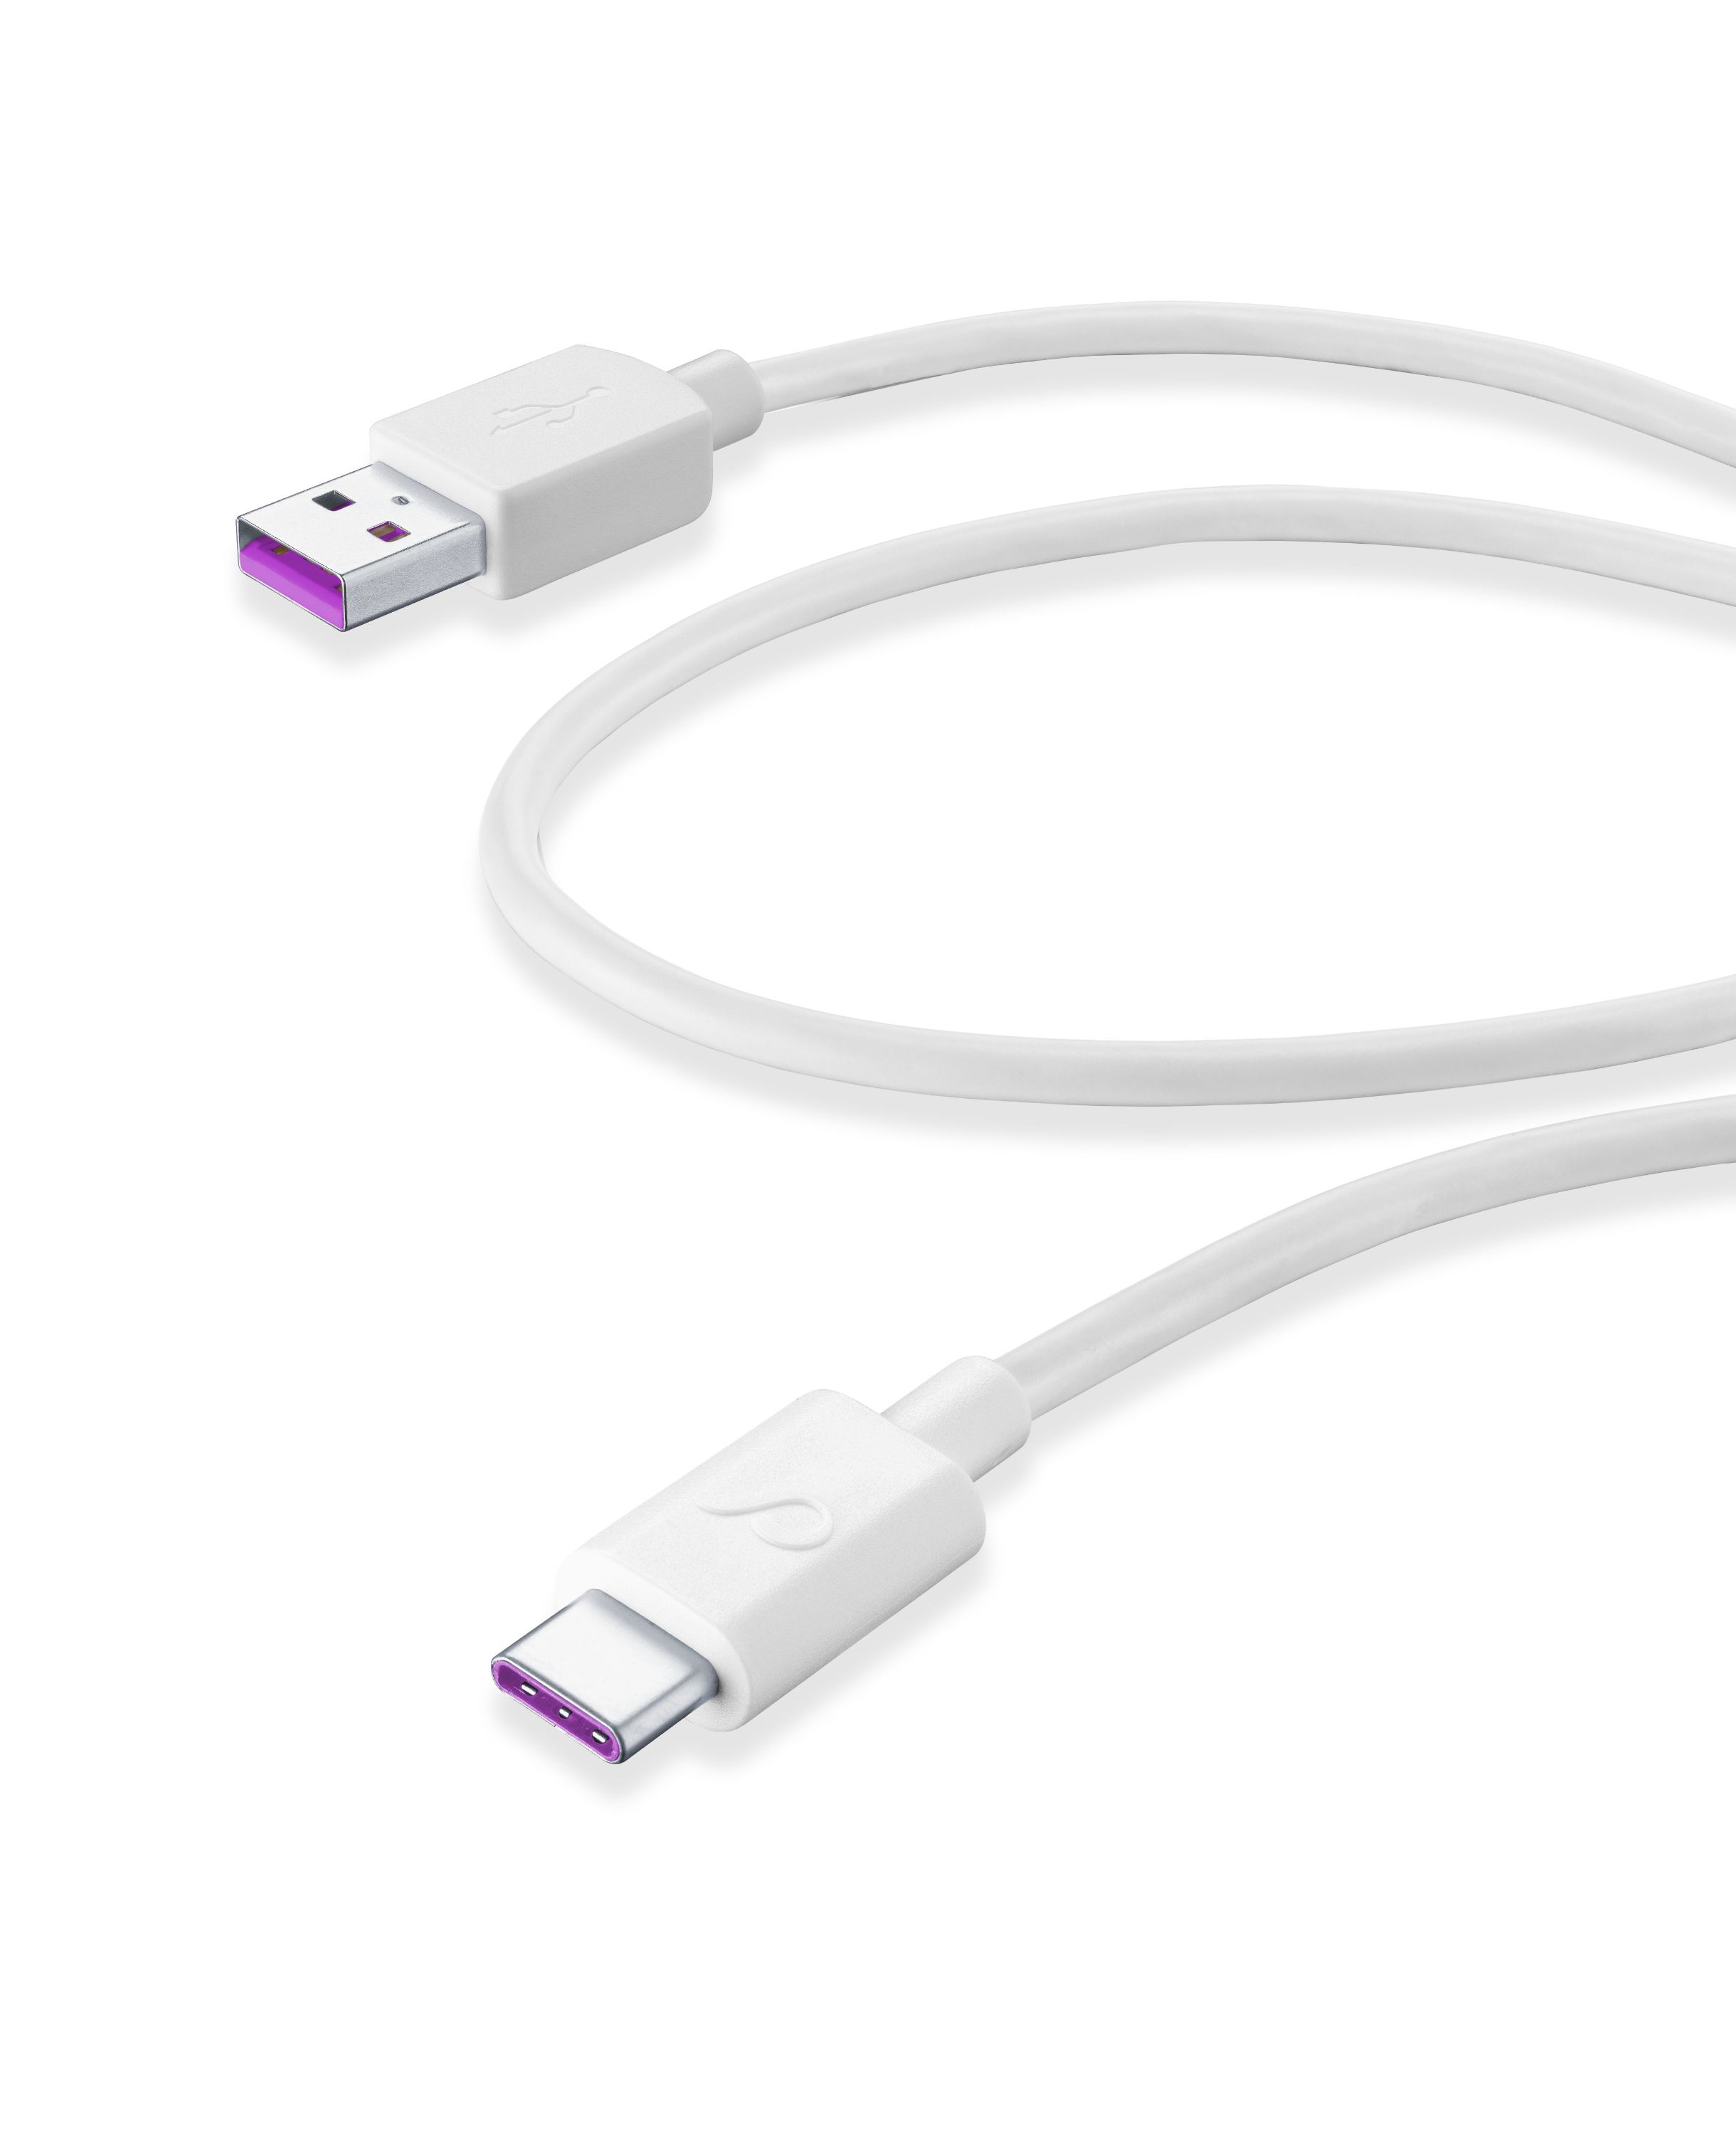 Usb kabel, usb-a naar usb-c 1,2m Huawei super charge, wit